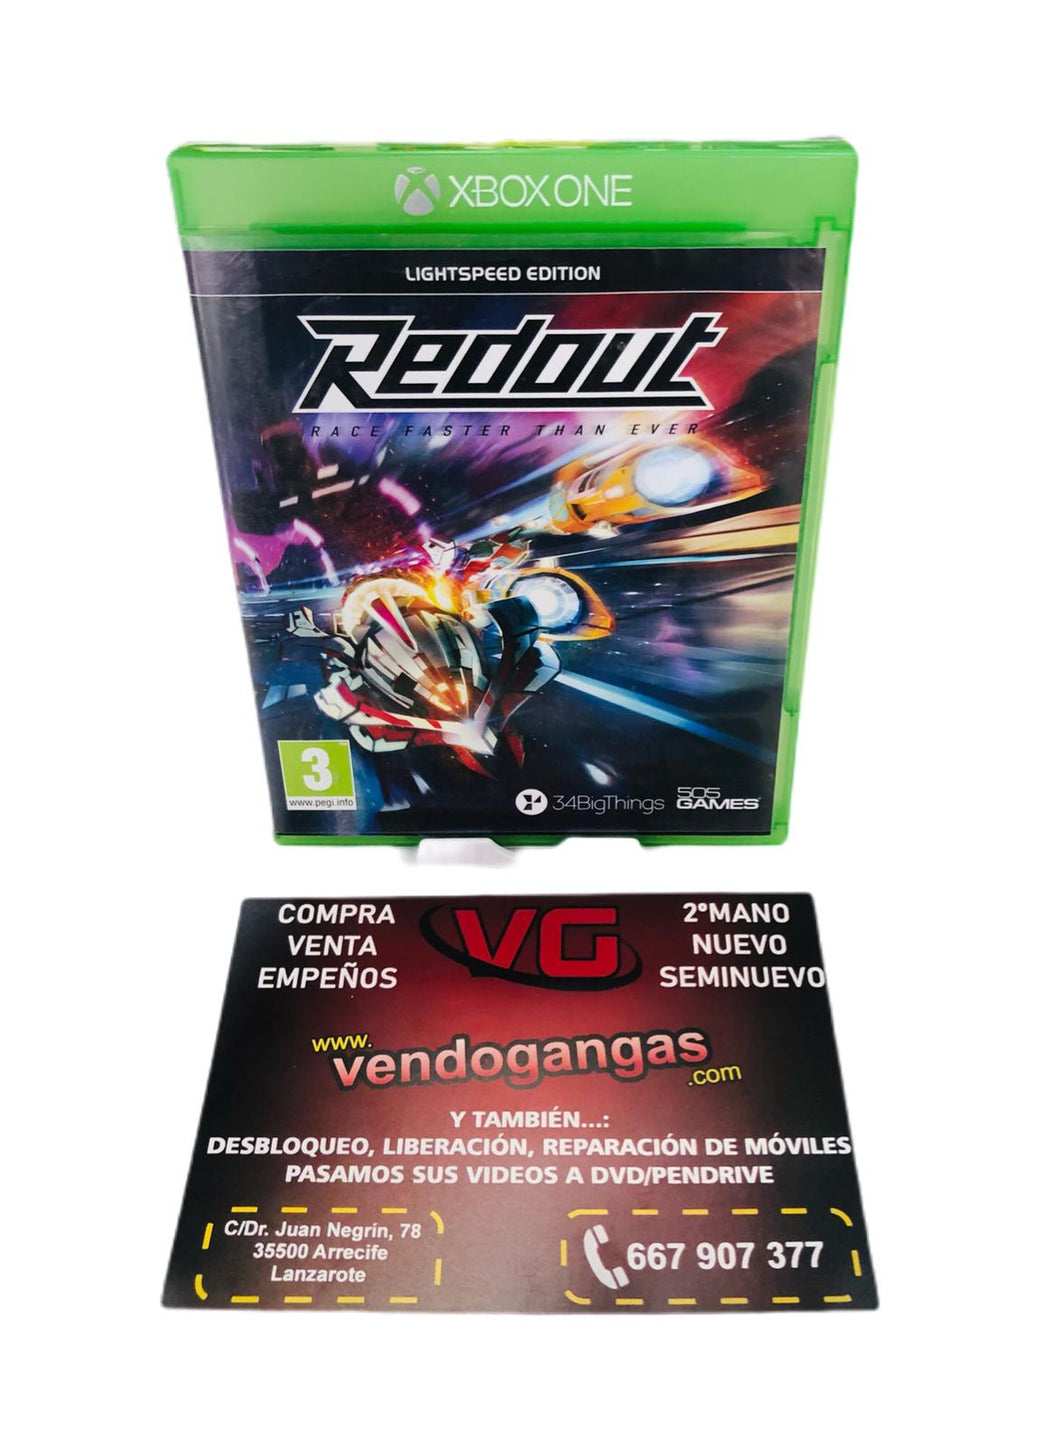 REDOUT XBOX ONE